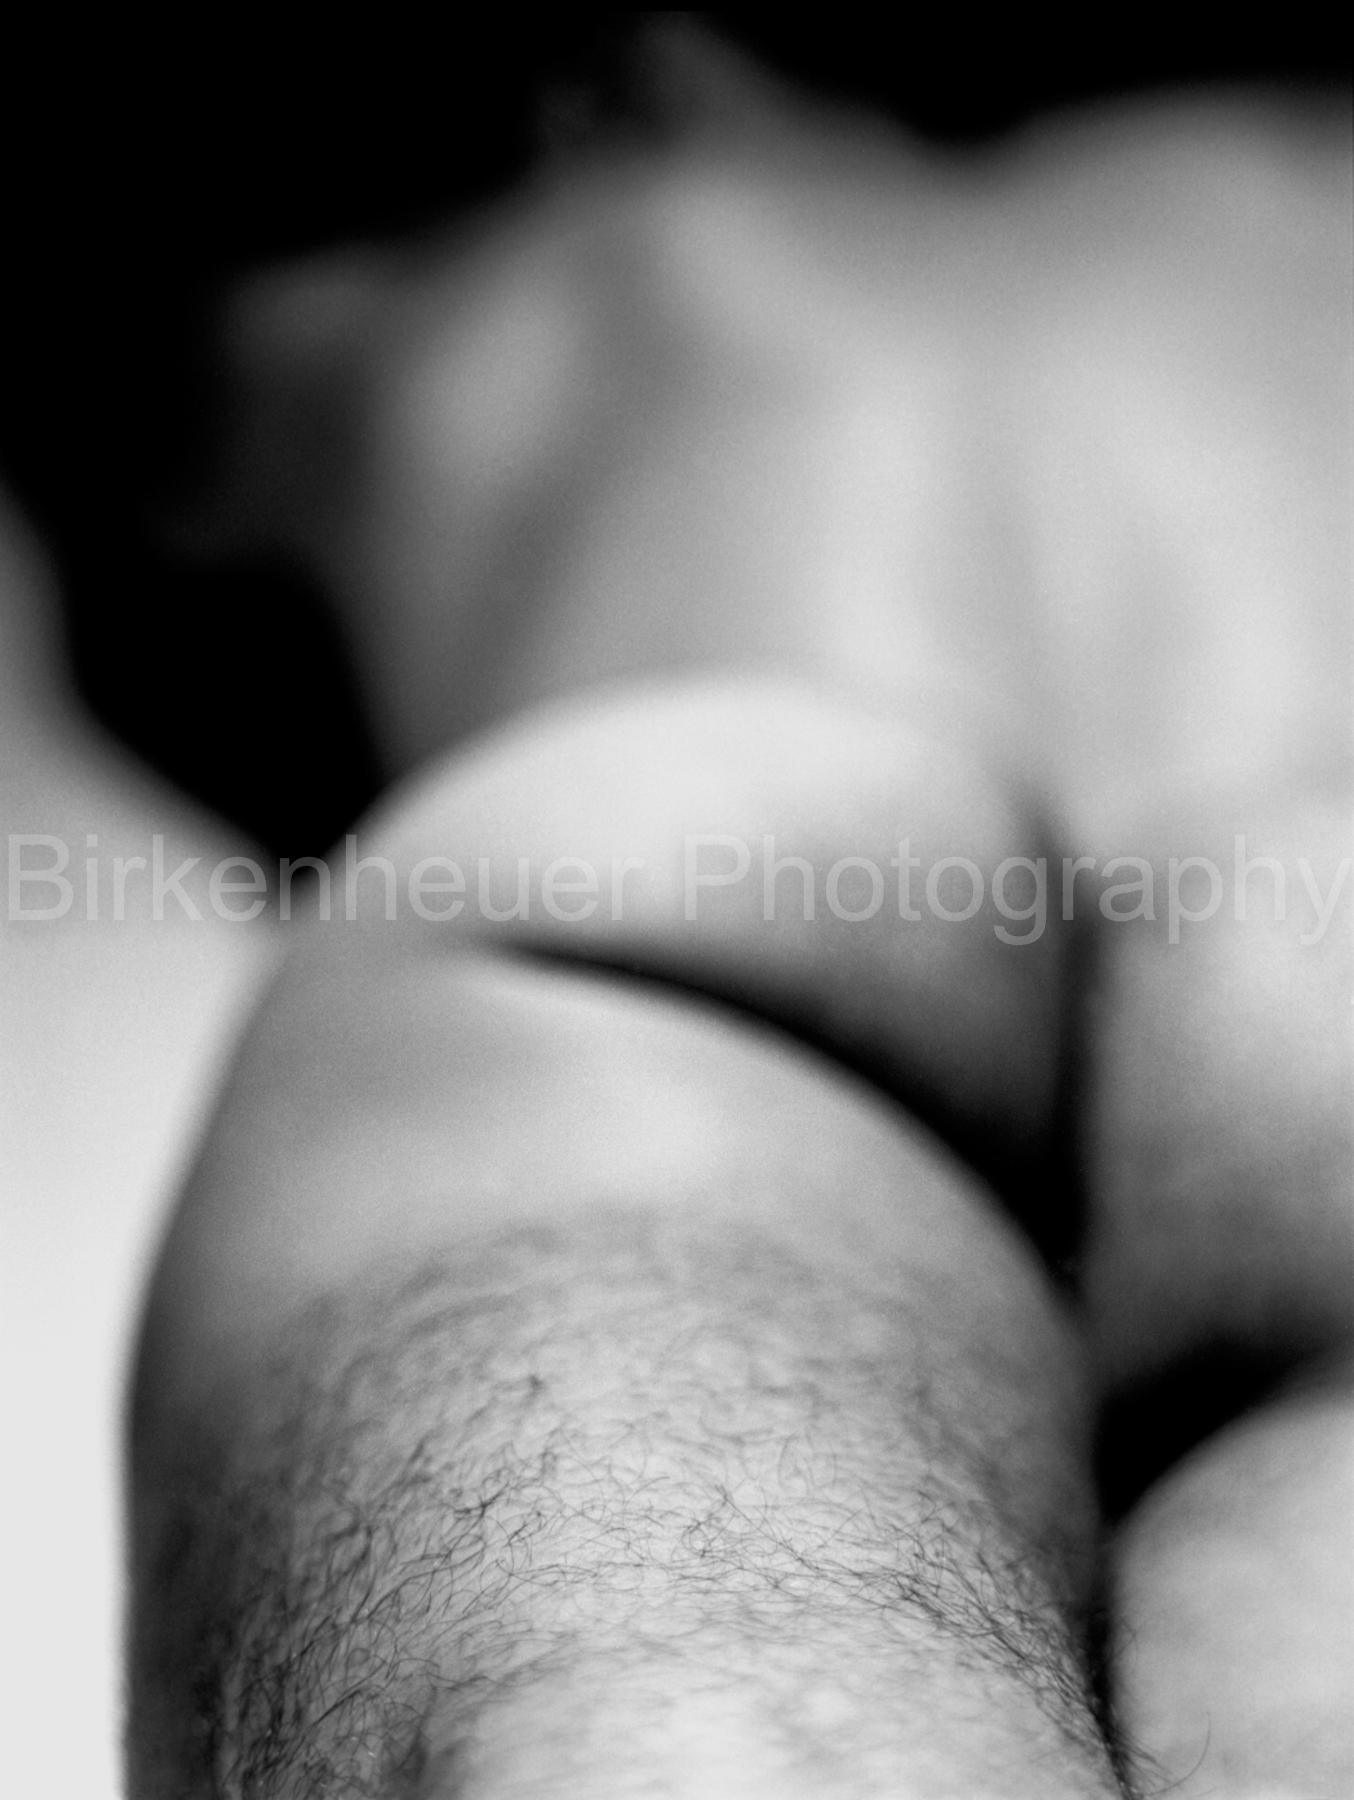 Doug Birkenheuer Nude Photograph - Leg Hair, Male Nude Buttock and Legs Black & White Photograph, Matted and Framed